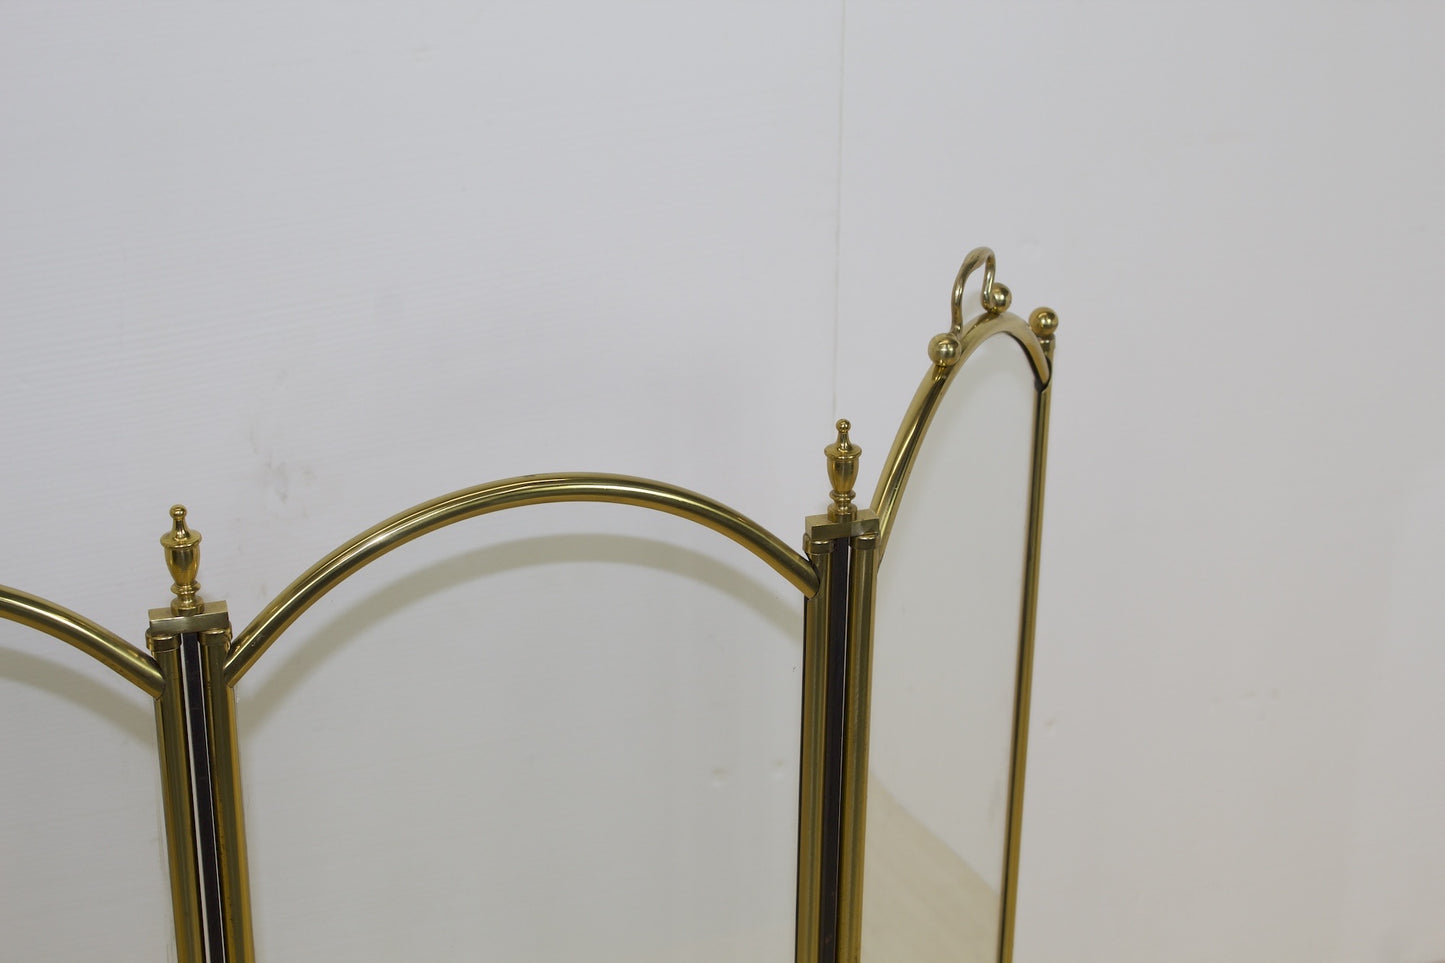 4 Panel Brass and Glass Fireplace Screen